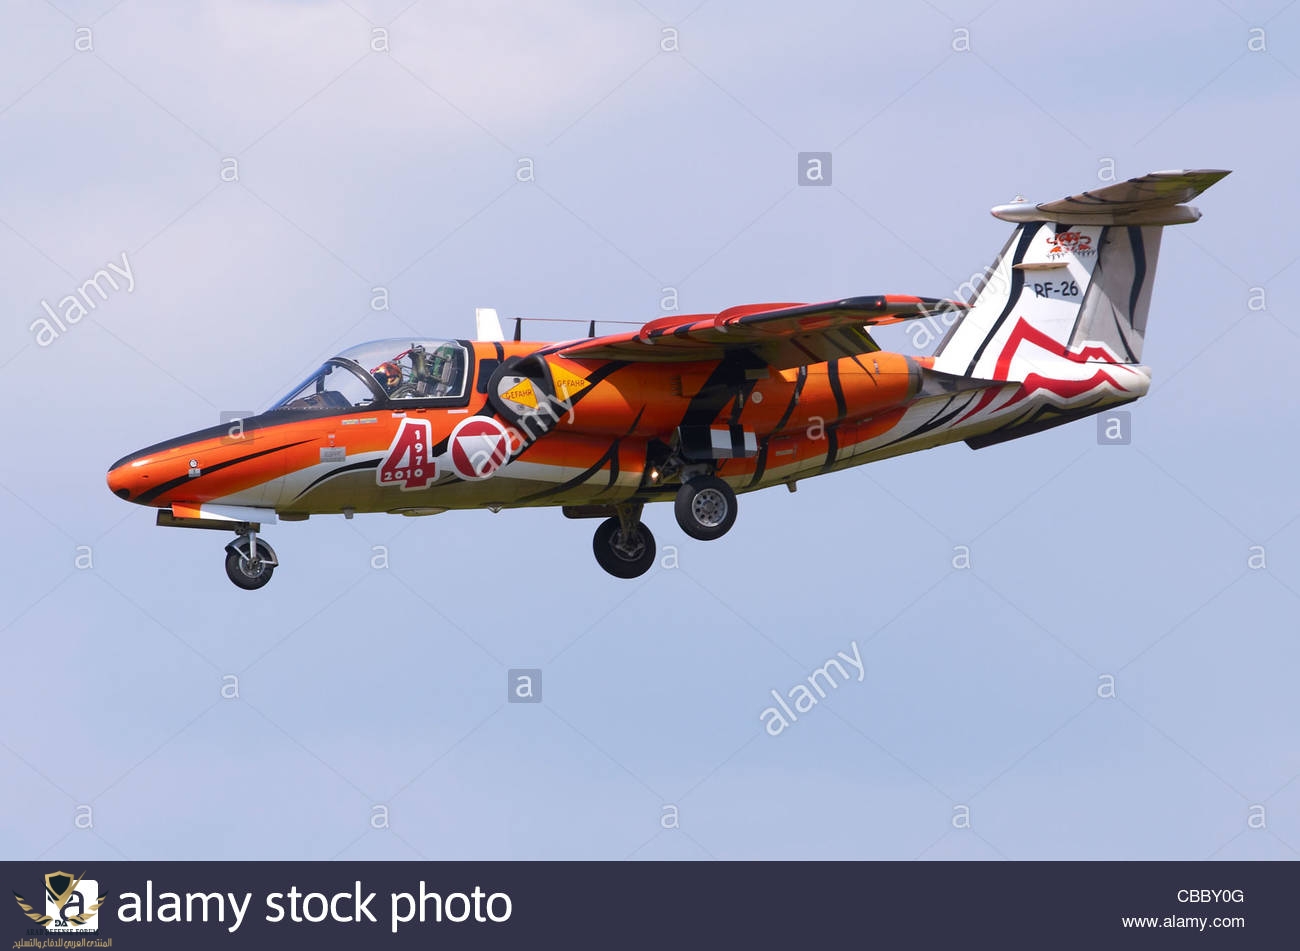 saab-105oe-operated-by-the-austrian-air-force-in-nato-tiger-meet-colour-CBBY0G.jpg